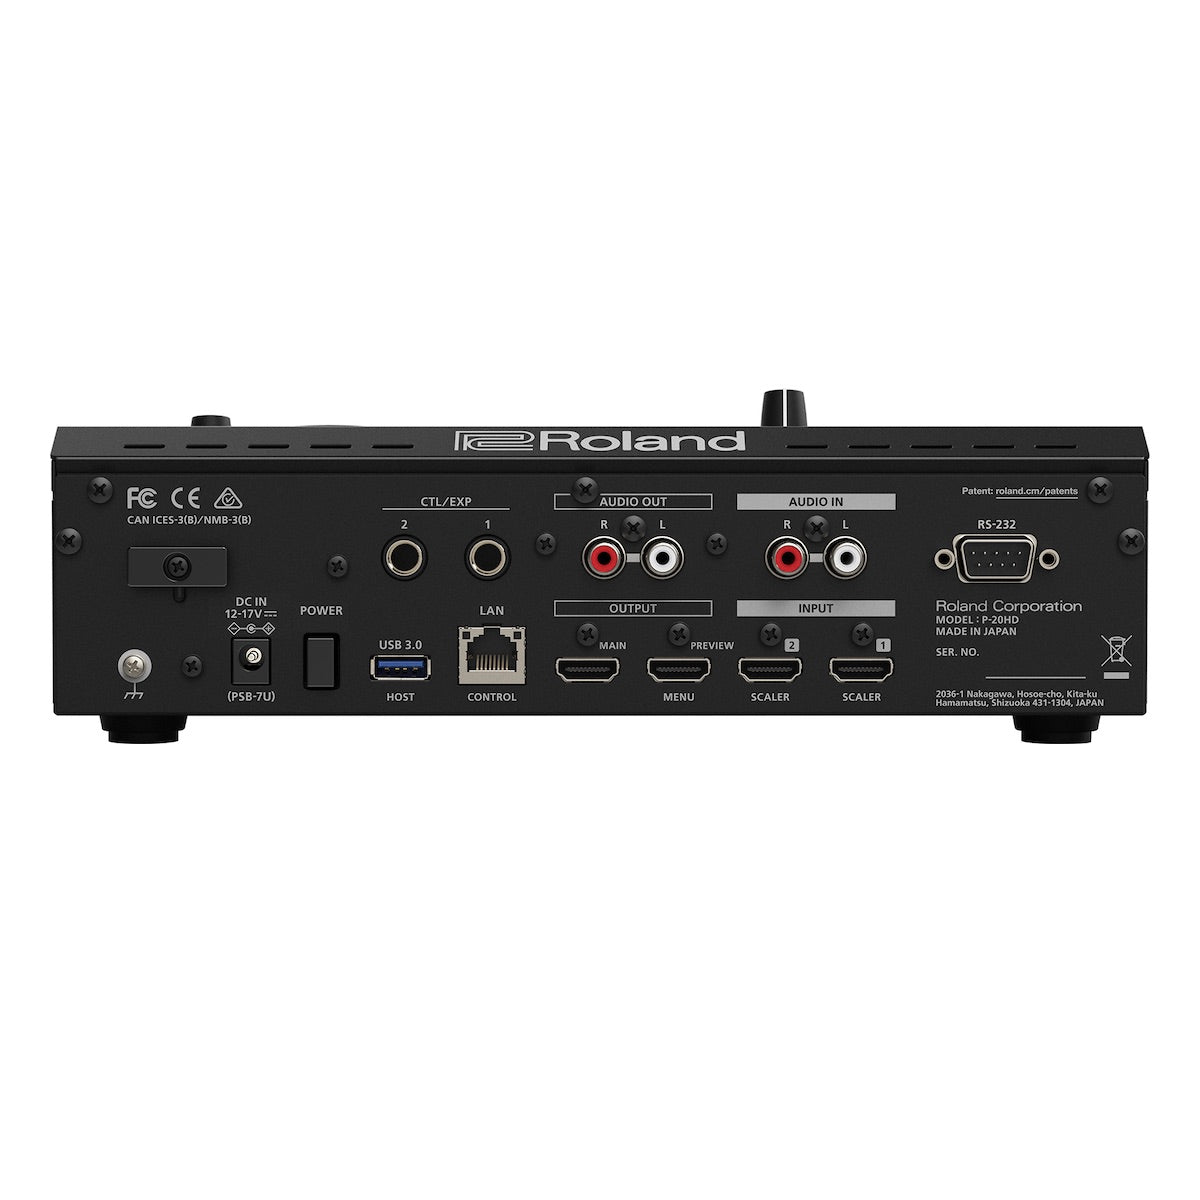 Roland P-20HD - Video Instant Replayer, rear